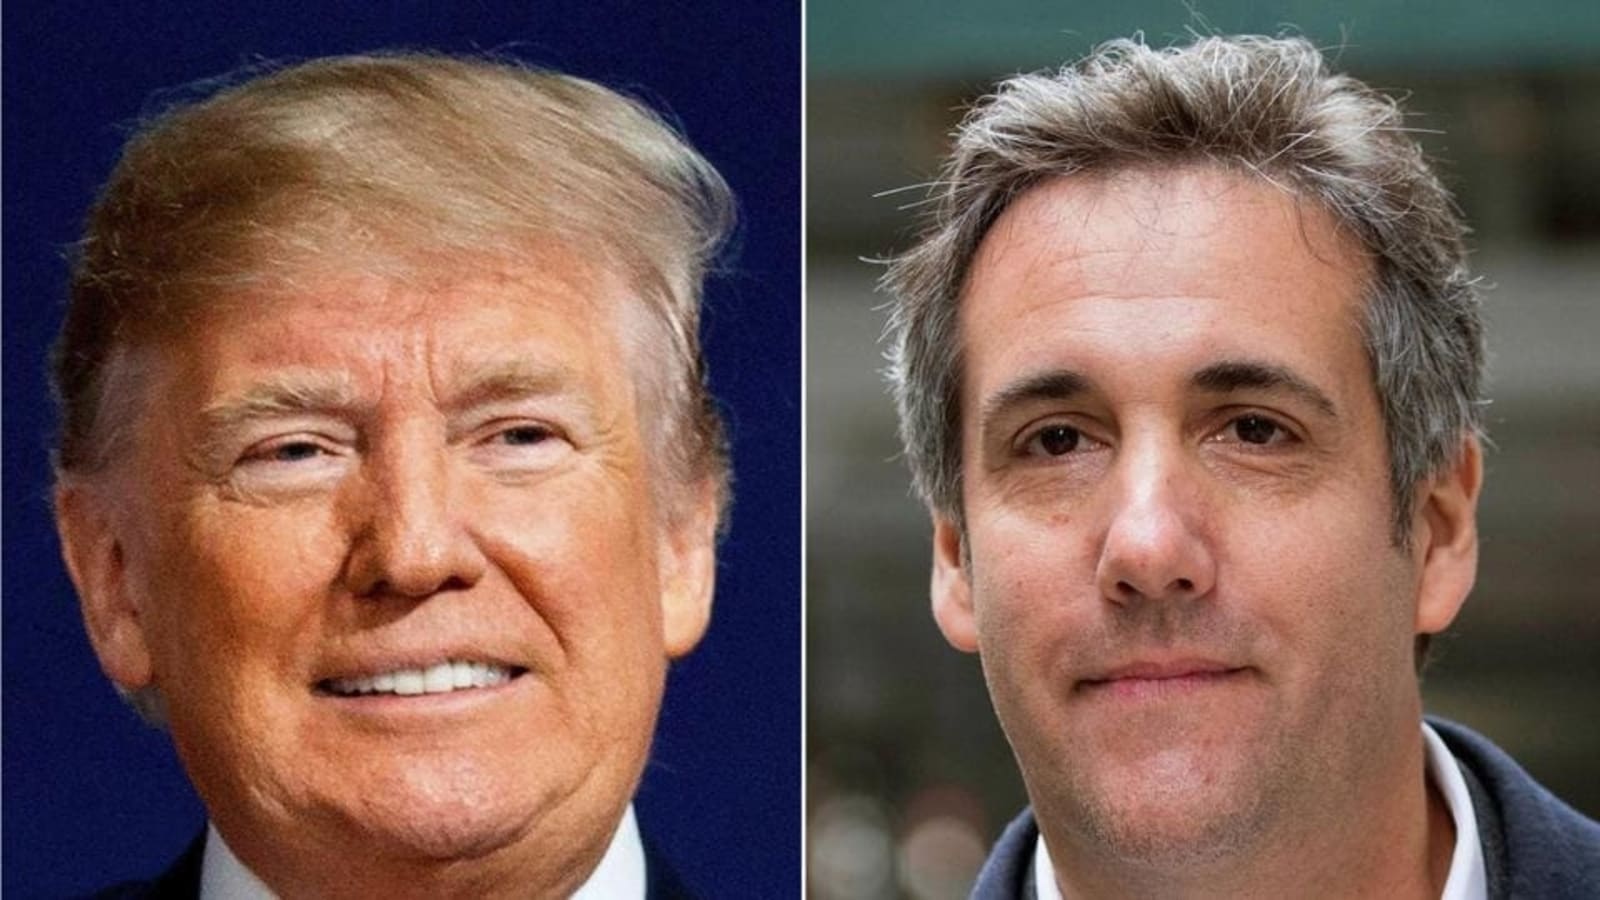 Trump trial's pivotal moment: Star witness Michael Cohen to take the stand